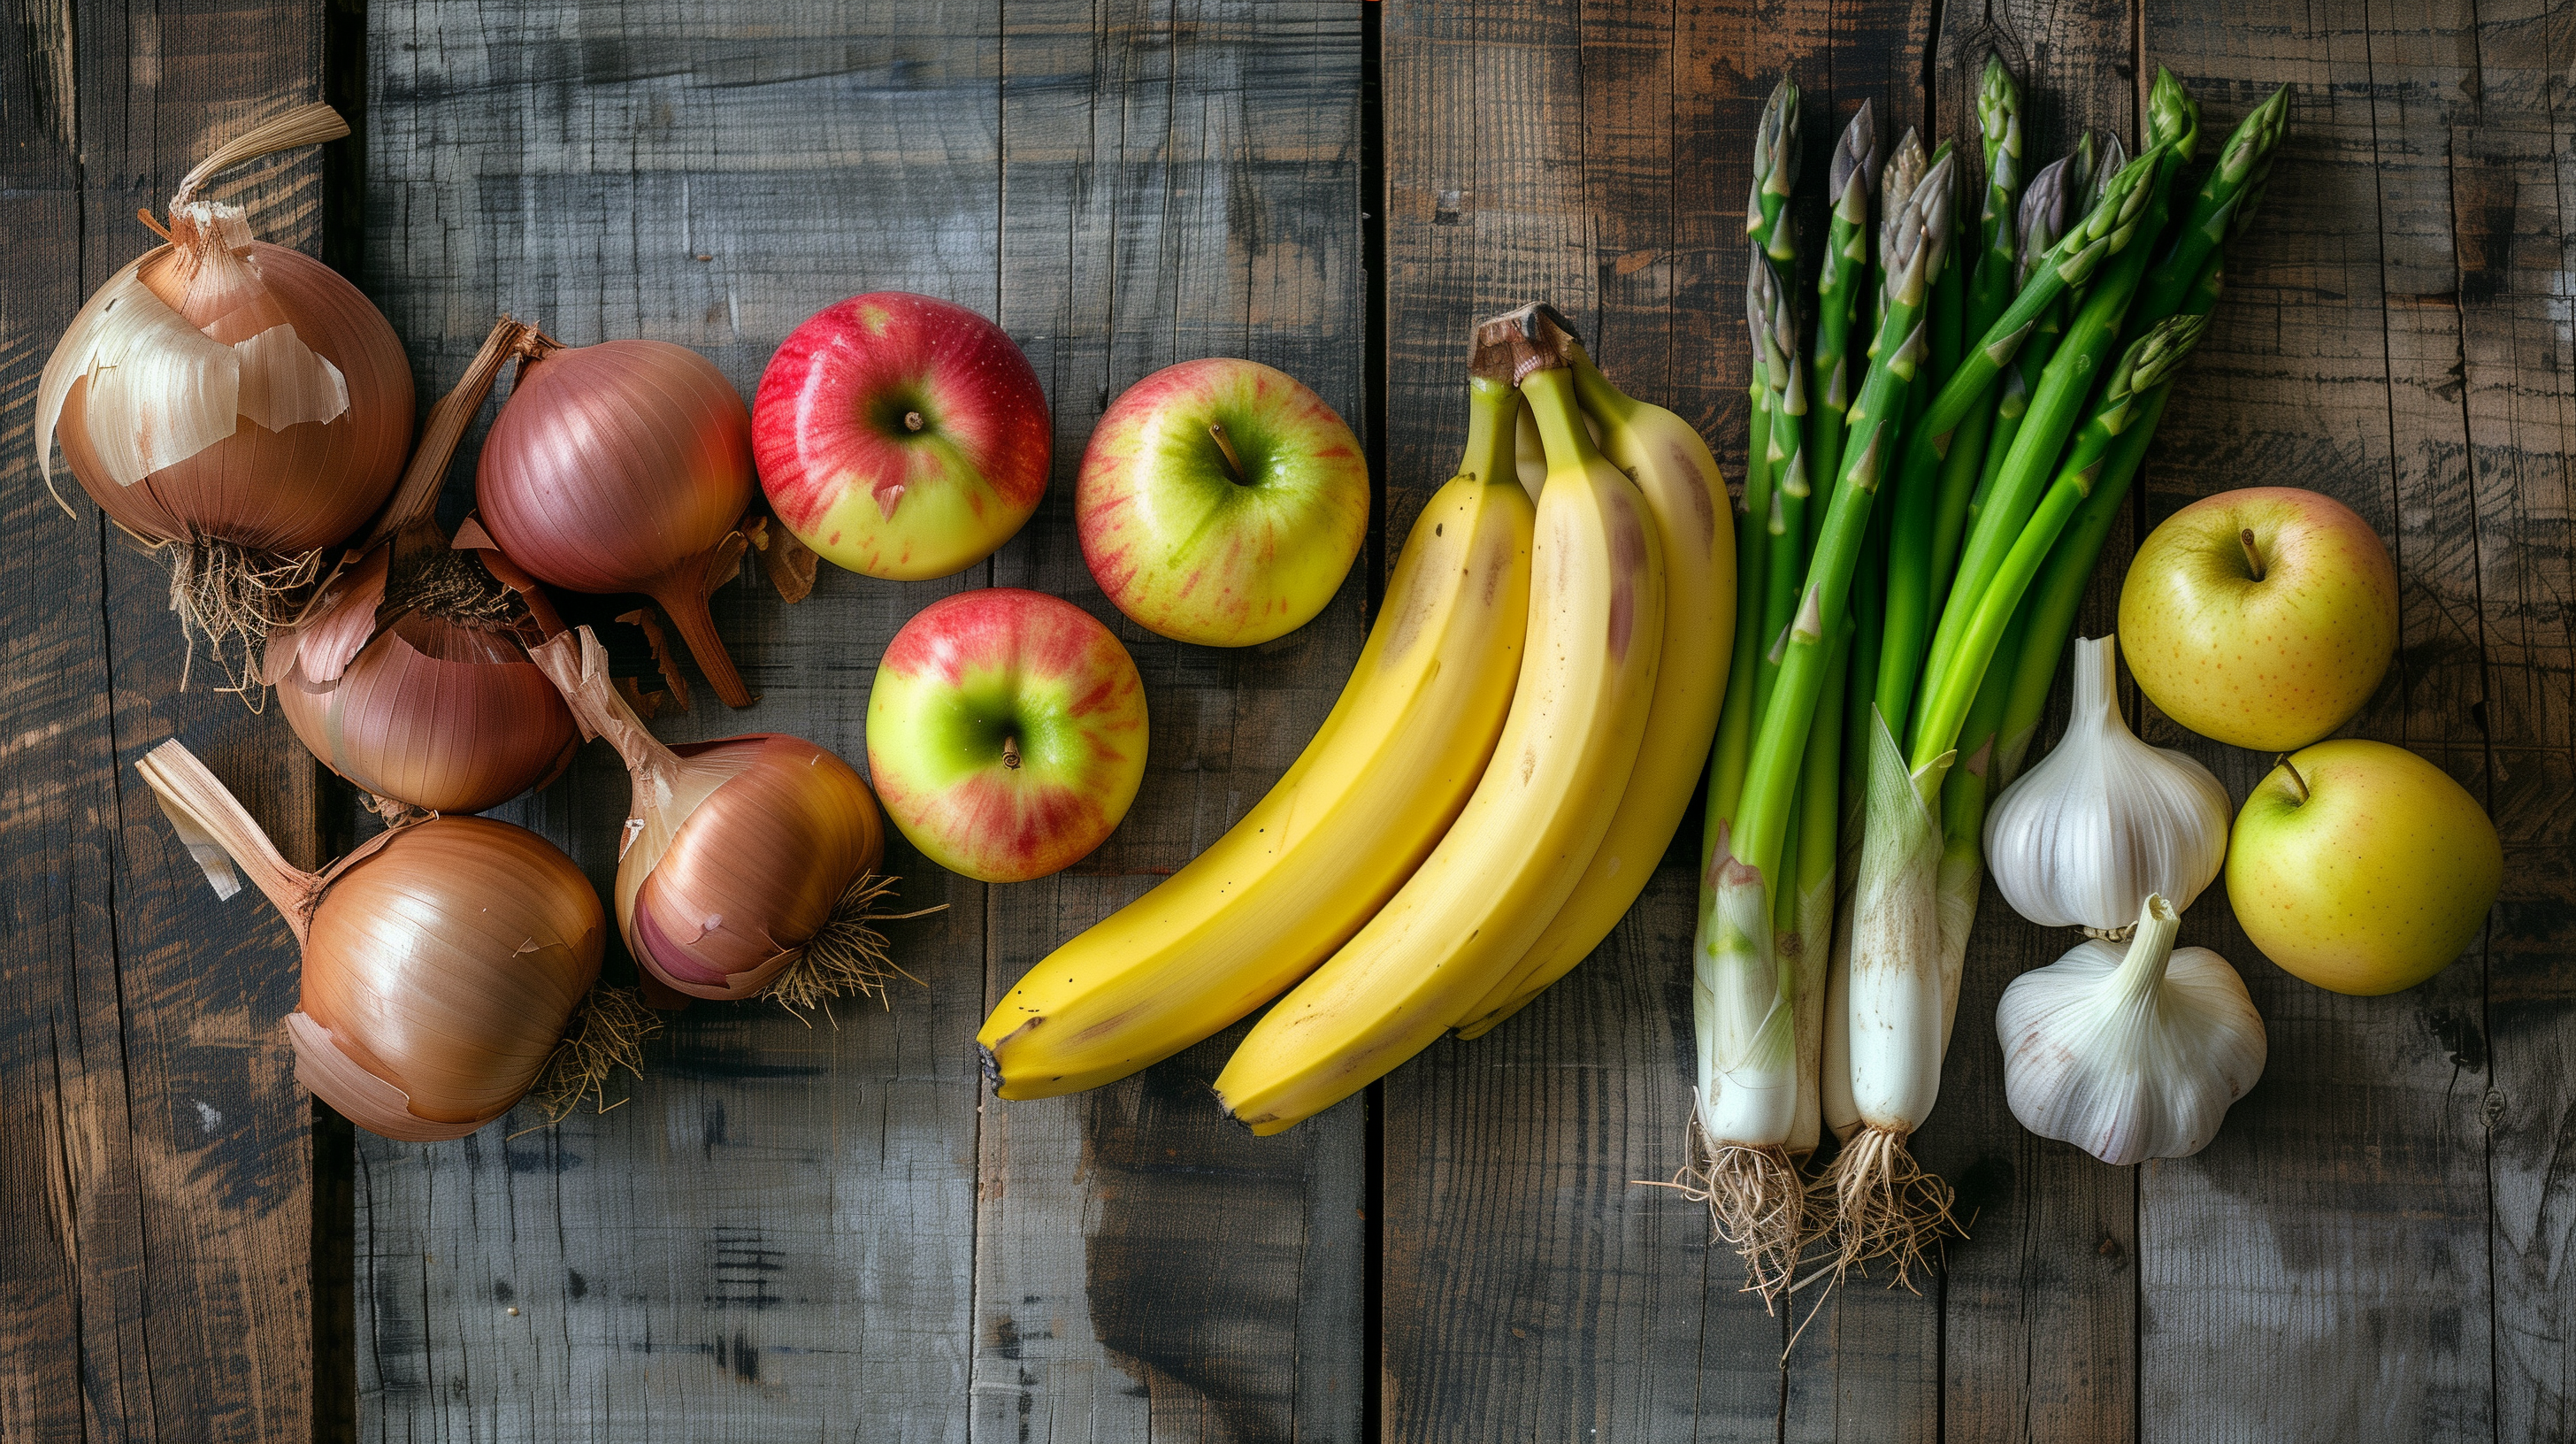 variety of prebiotic-rich foods--garlic, onions, bananas, apples, and asparagus